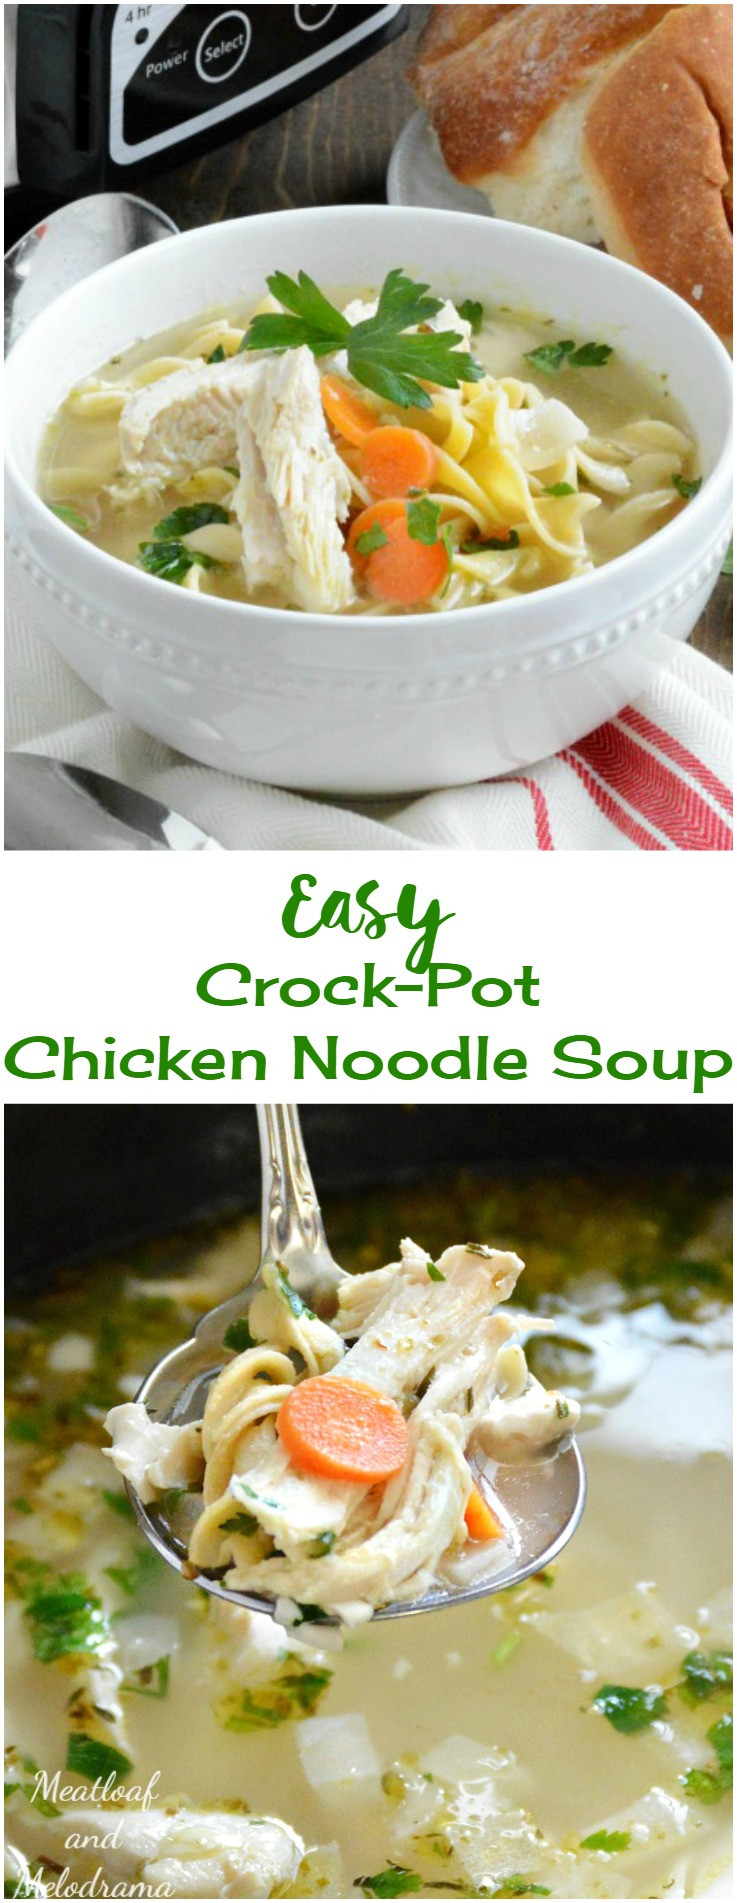 can you put dry noodles in a crock pot